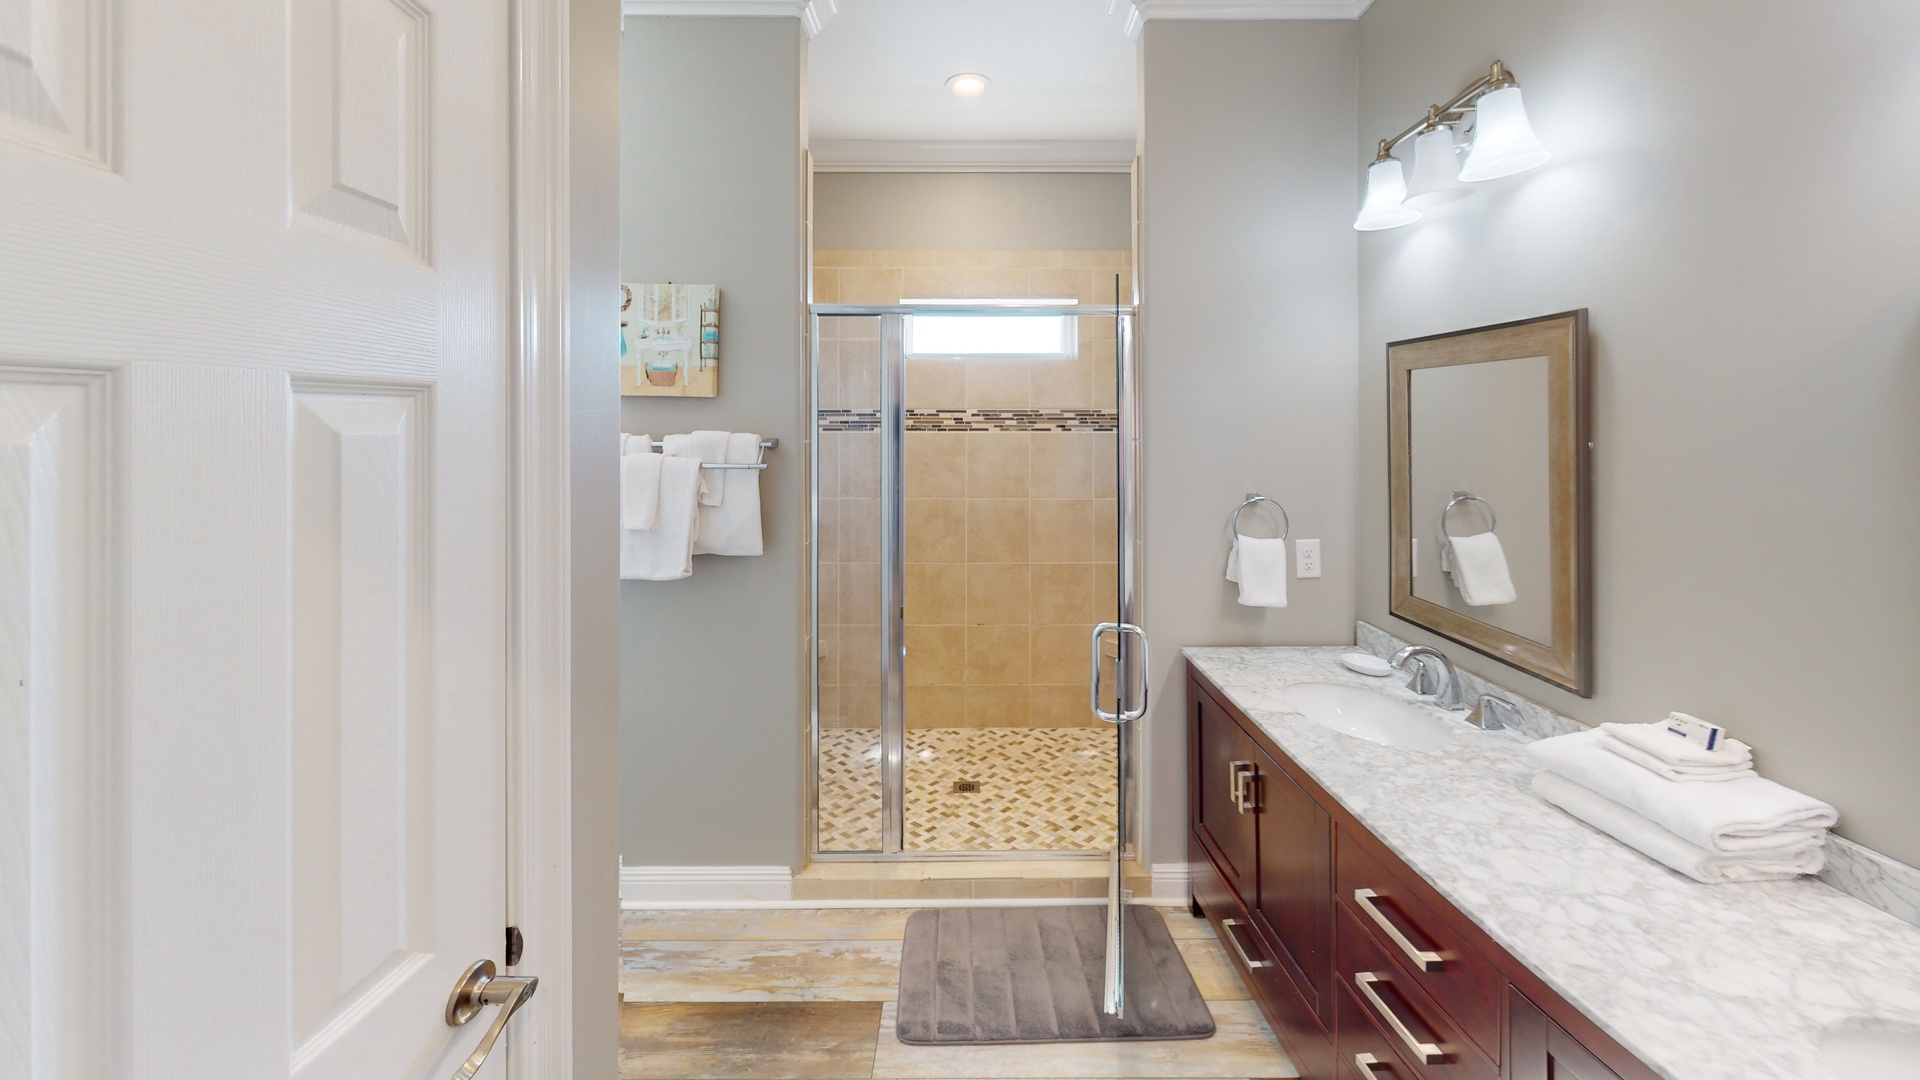 The private in the 2nd master features a double vanity, walk-in shower and a soaking tub